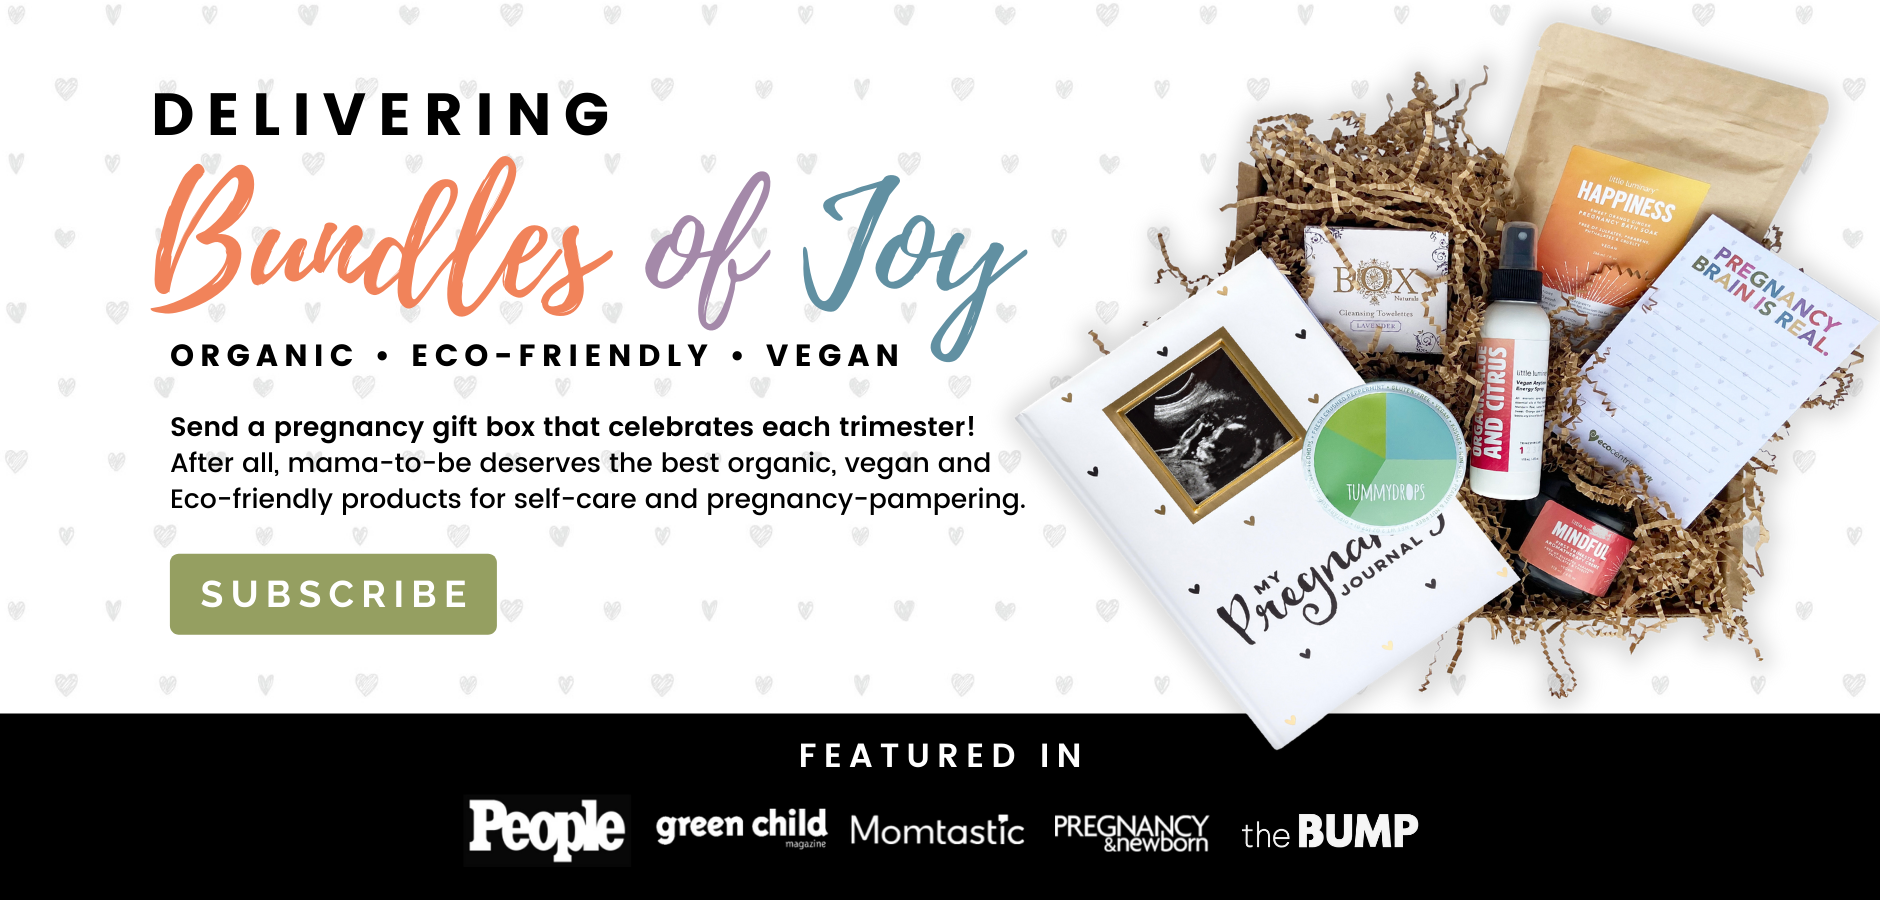 Send a pregnancy gift box that celebrates each trimester! After all, mama-to-be deserves the best organic, vegan and Eco-friendly products for self-care and pregnancy-pampering.